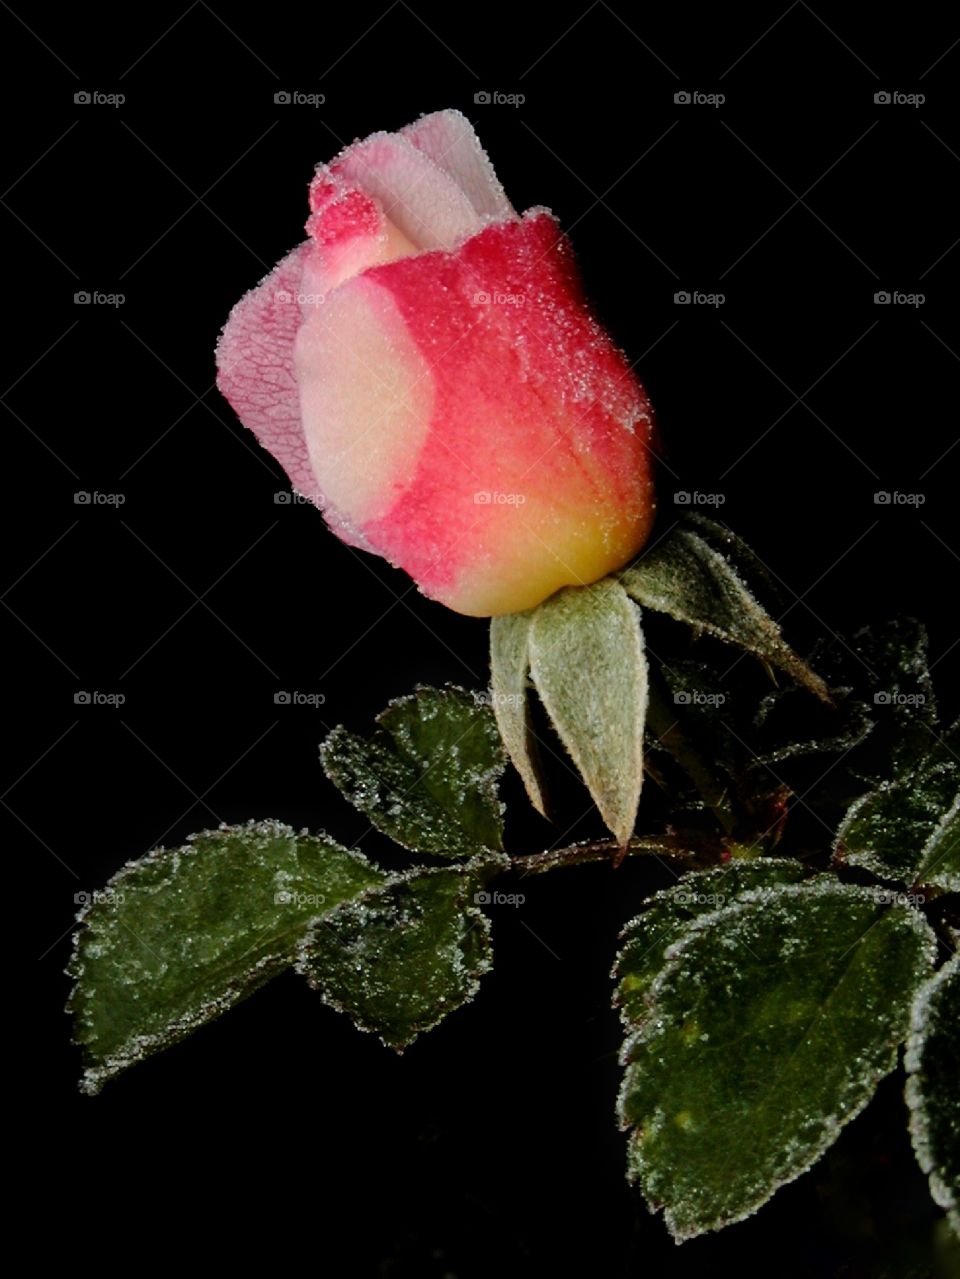 Frost on a red rose